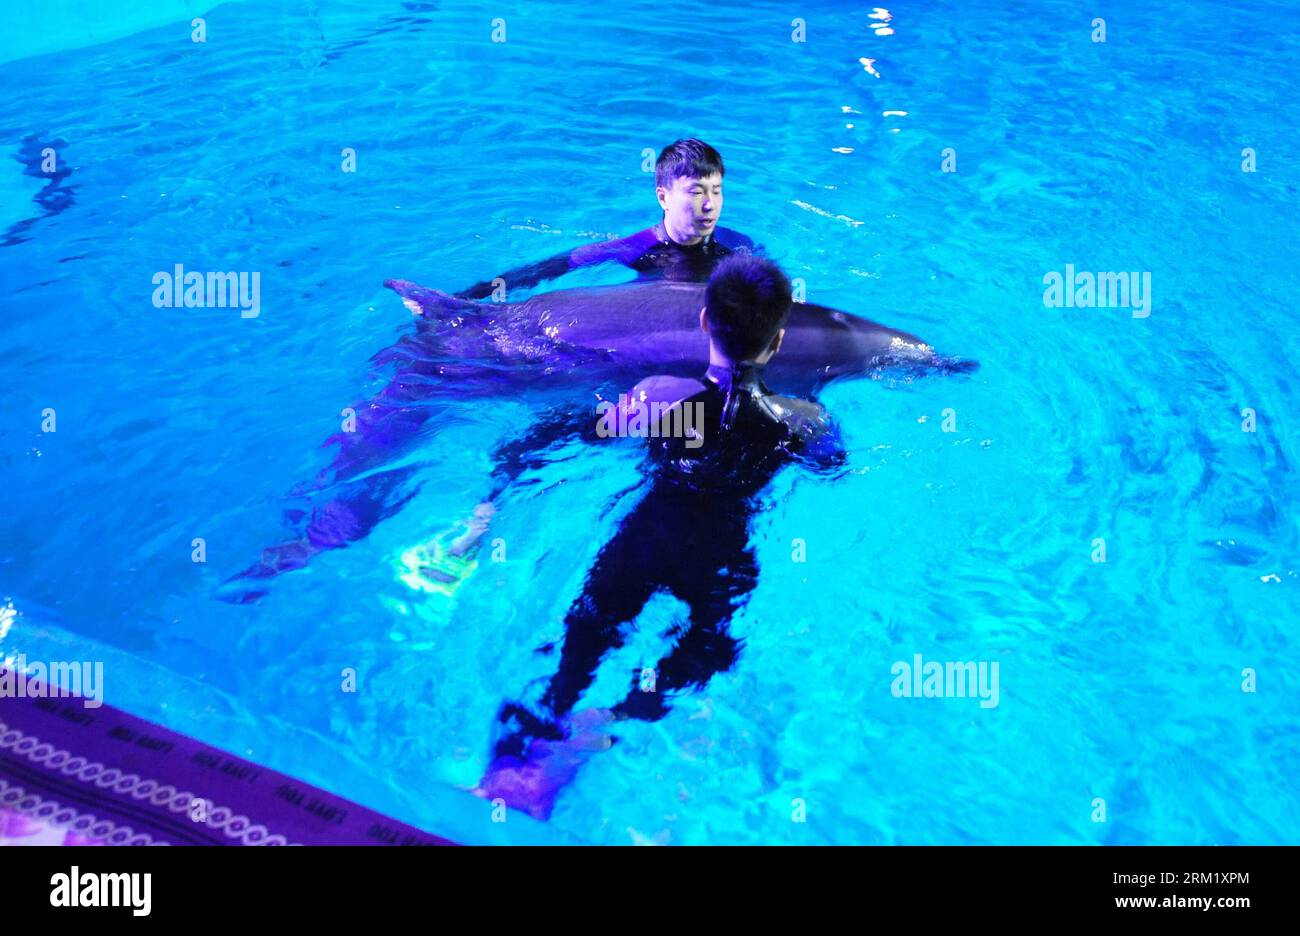 Bildnummer: 59647289  Datum: 15.05.2013  Copyright: imago/Xinhua (130515) -- YANTAI, May 15, 2013 (Xinhua) -- Workers help the arrived dolphins adapt the new environment in a breeding pool of the Ocean Aquarium of Penglai in Penglai City, east China s Shandong Province, May 15, 2013. Ten dolphins, arriving in Yantai of Shandong Province from Osaka of Japan on May 14, with an average age of 2 to 3 and an average weight of 200 to 700 kilograms, are about 3 meters in length and will see the public after 1 to 3 months of adaptation. (Xinhua/Chu Yang) (zwx) CHINA-SHANDONG-PENGLAI-DOLPHINS FROM JAPA Stock Photo